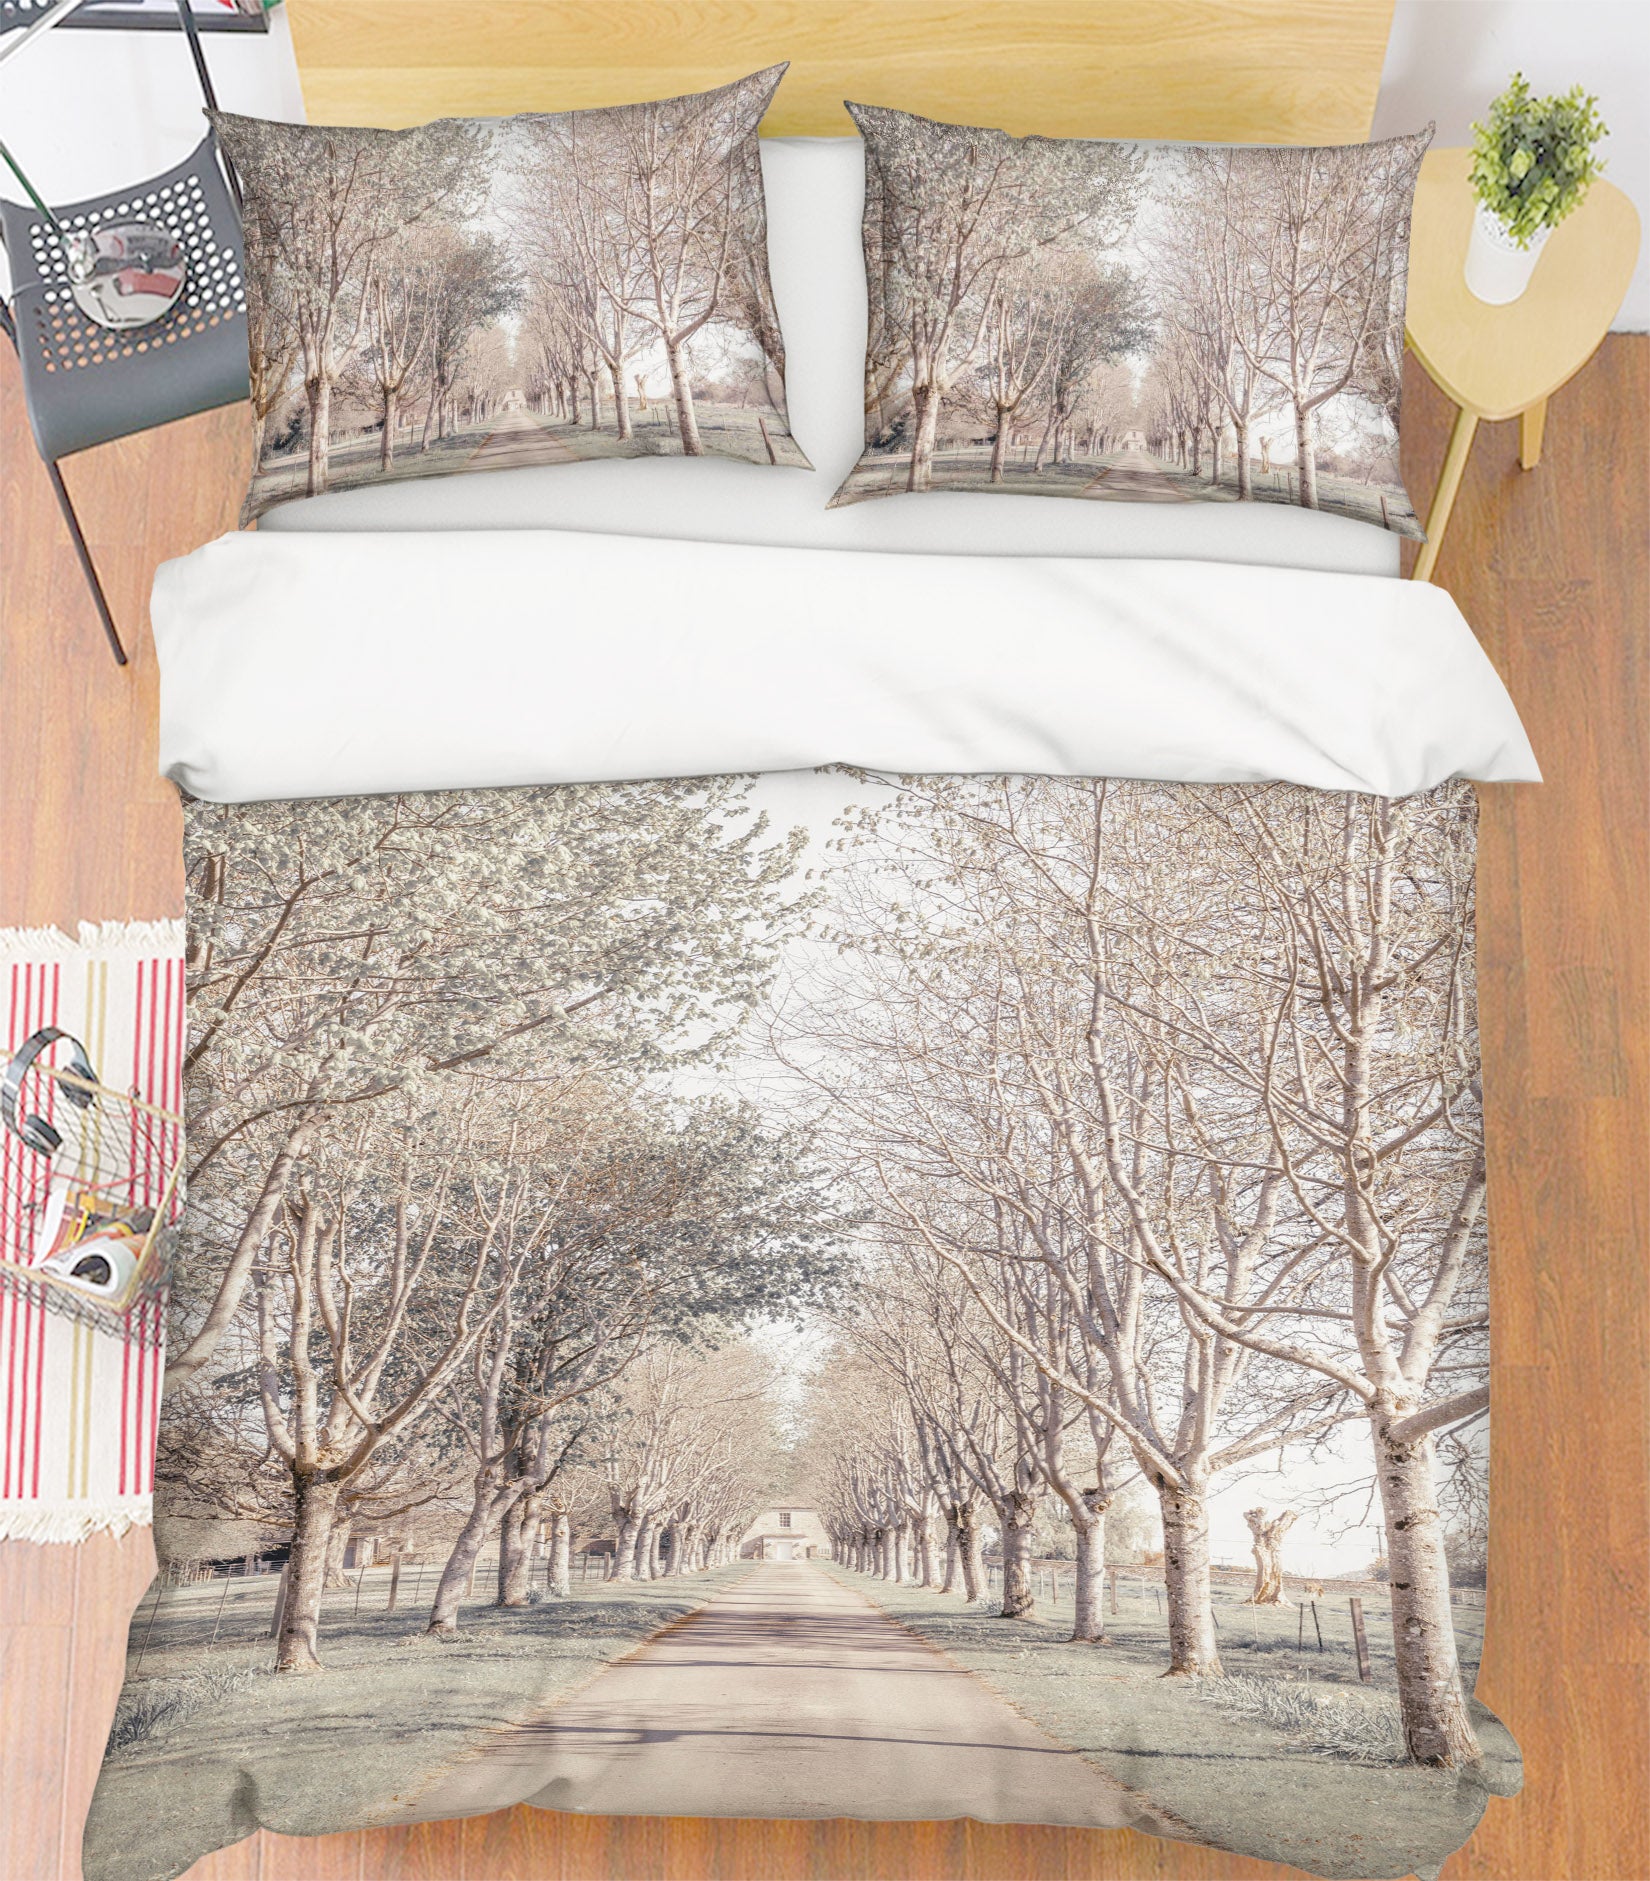 3D Tree Meadow 7185 Assaf Frank Bedding Bed Pillowcases Quilt Cover Duvet Cover